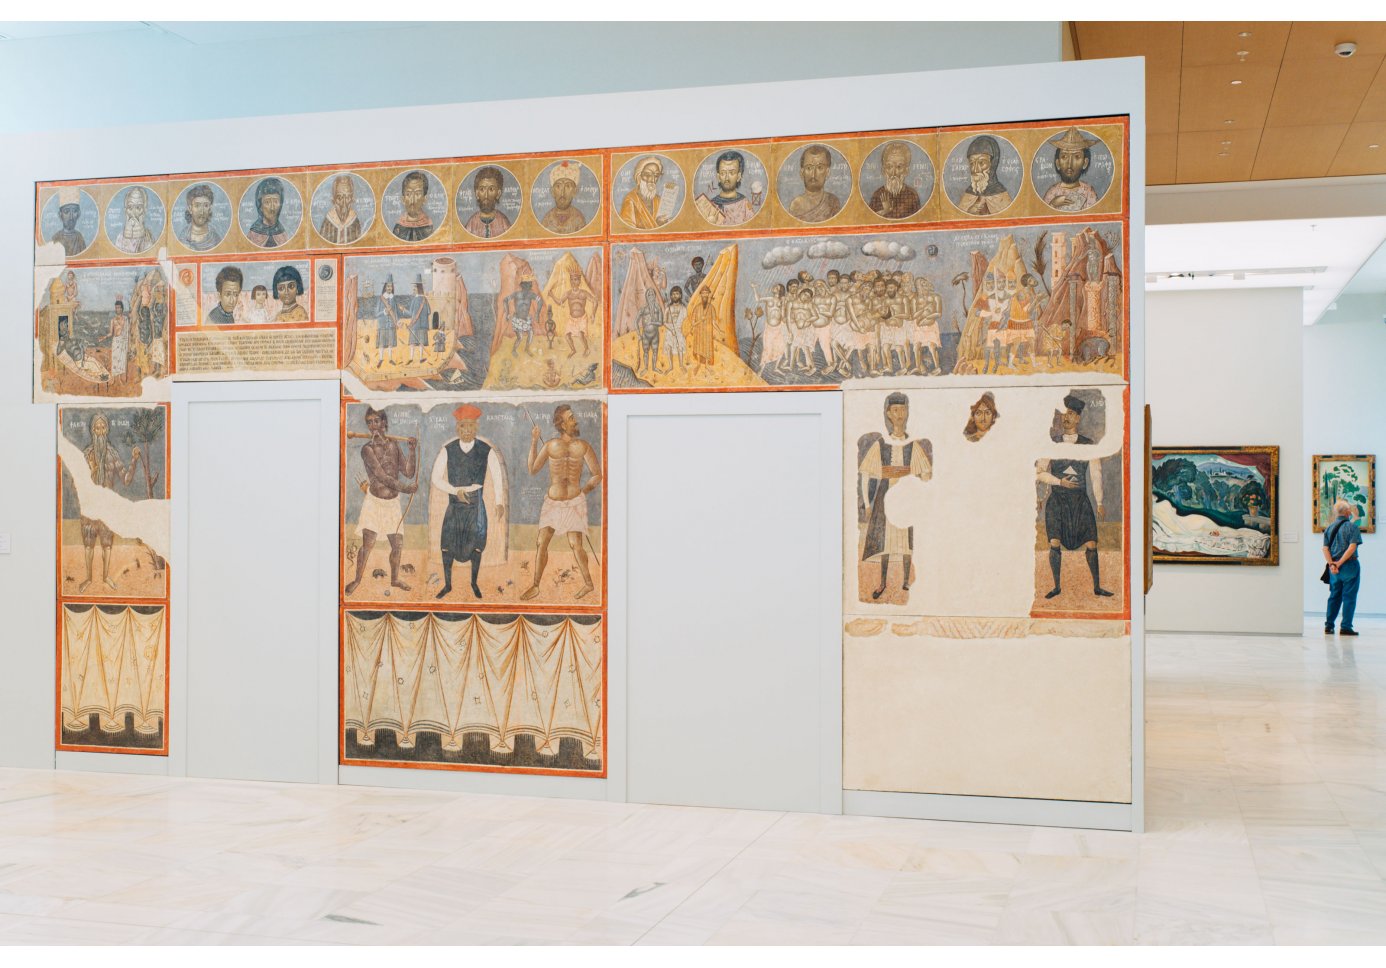 Wall Painting by Fotis Kontoglou at the National Gallery of Greece in Athens